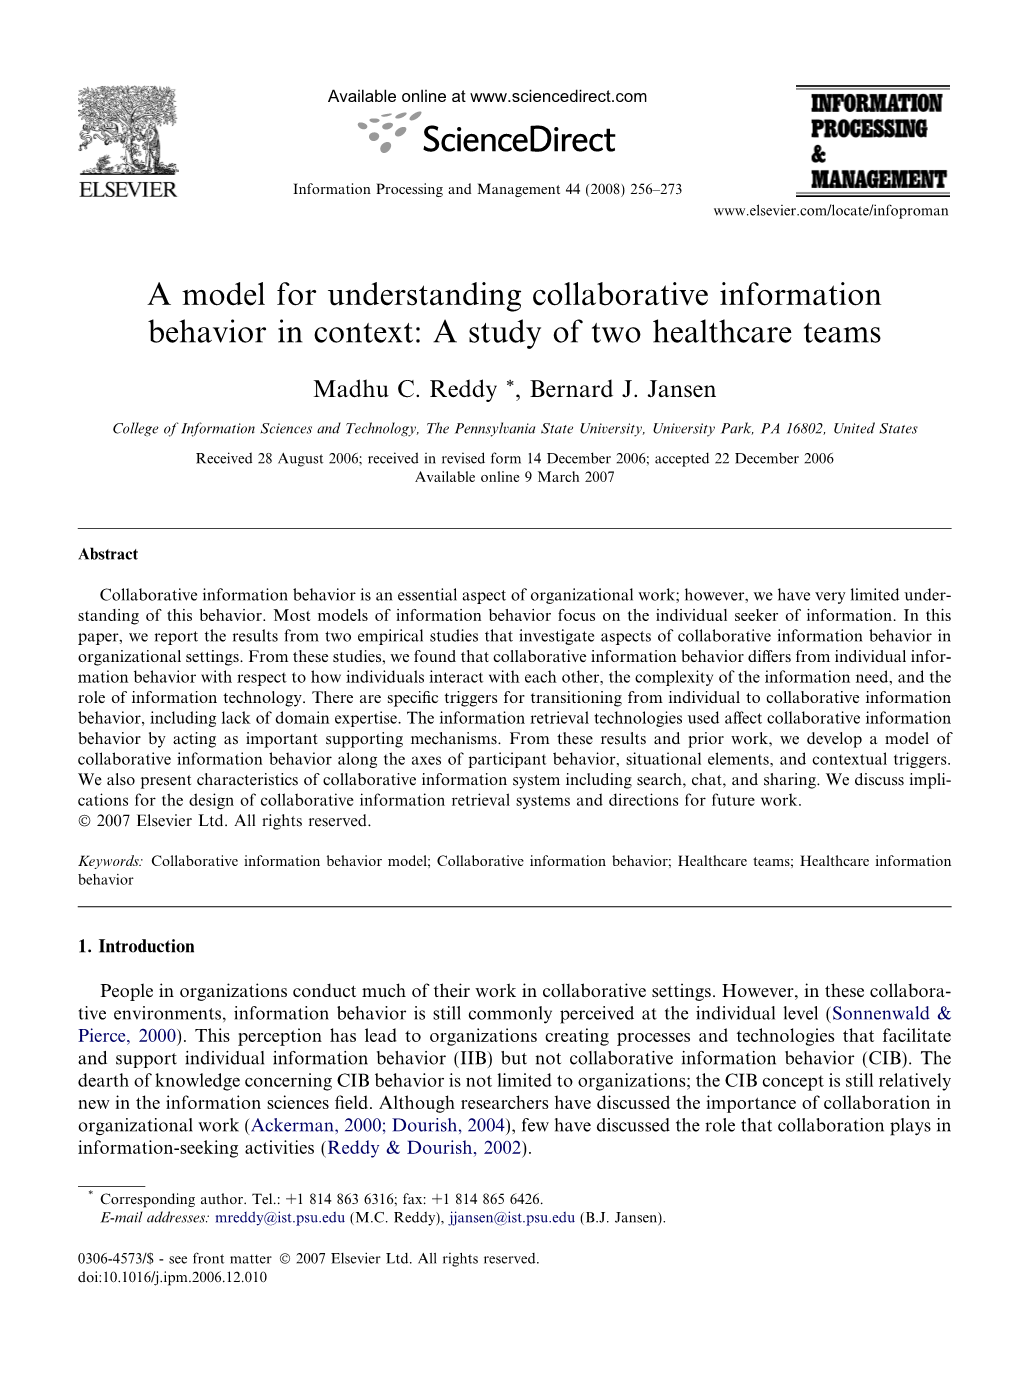 A Model for Understanding Collaborative Information Behavior in Context: a Study of Two Healthcare Teams